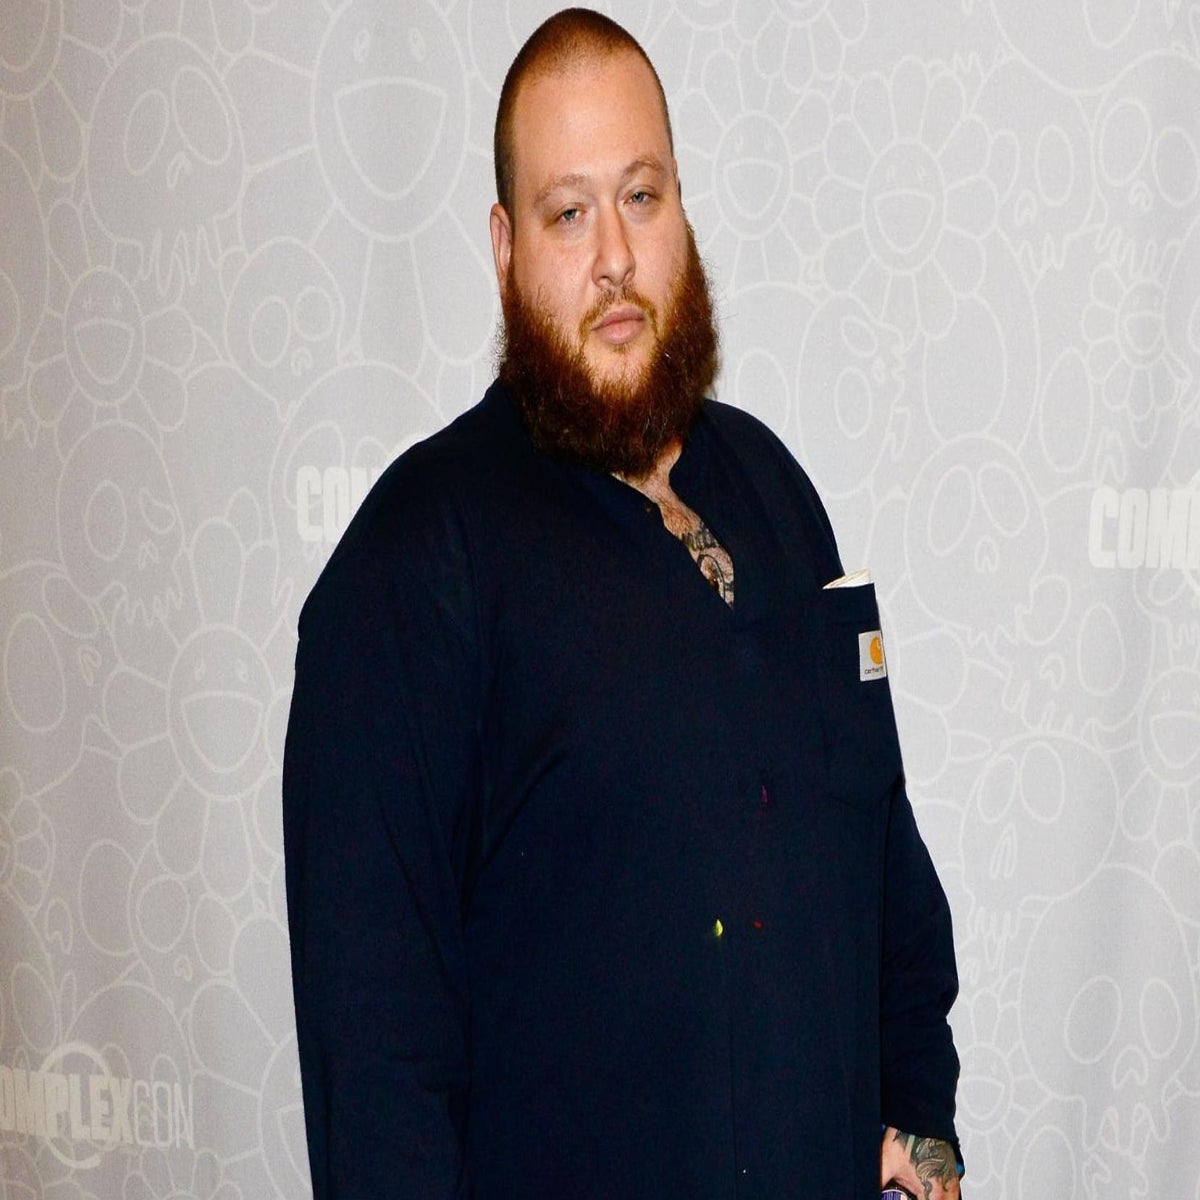 Rapper Action Bronson Just Shared an Update on His Weight Loss Journey